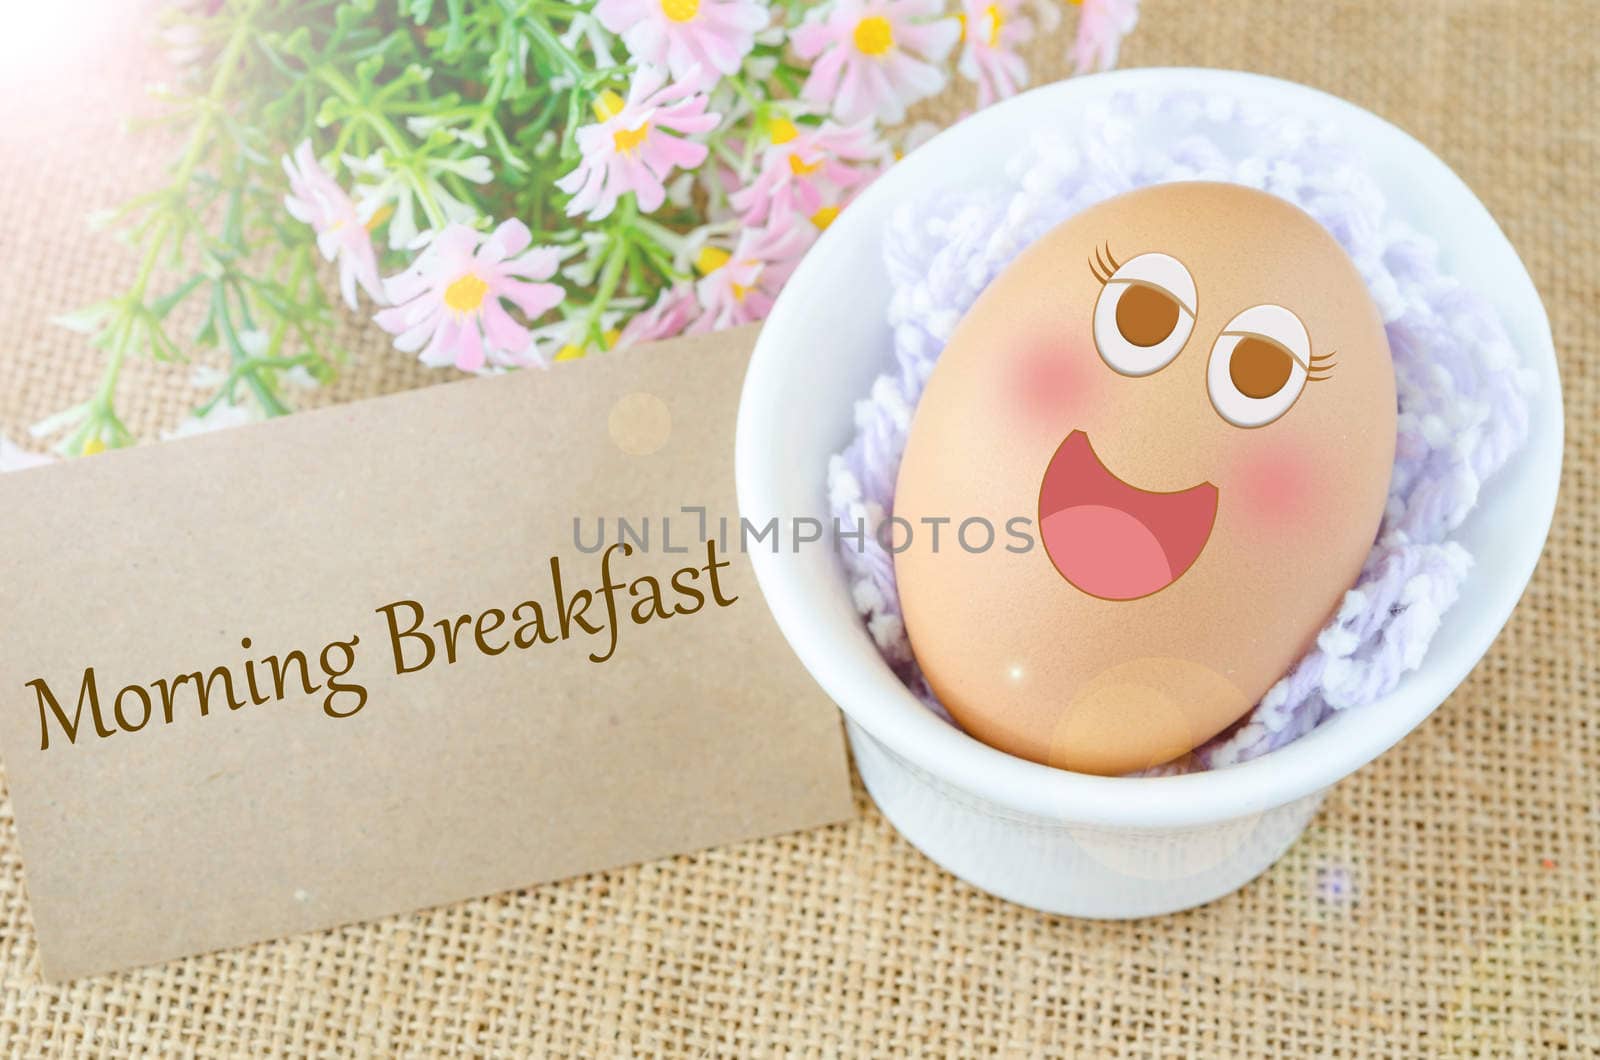 Morning breakfast and egg by Gamjai